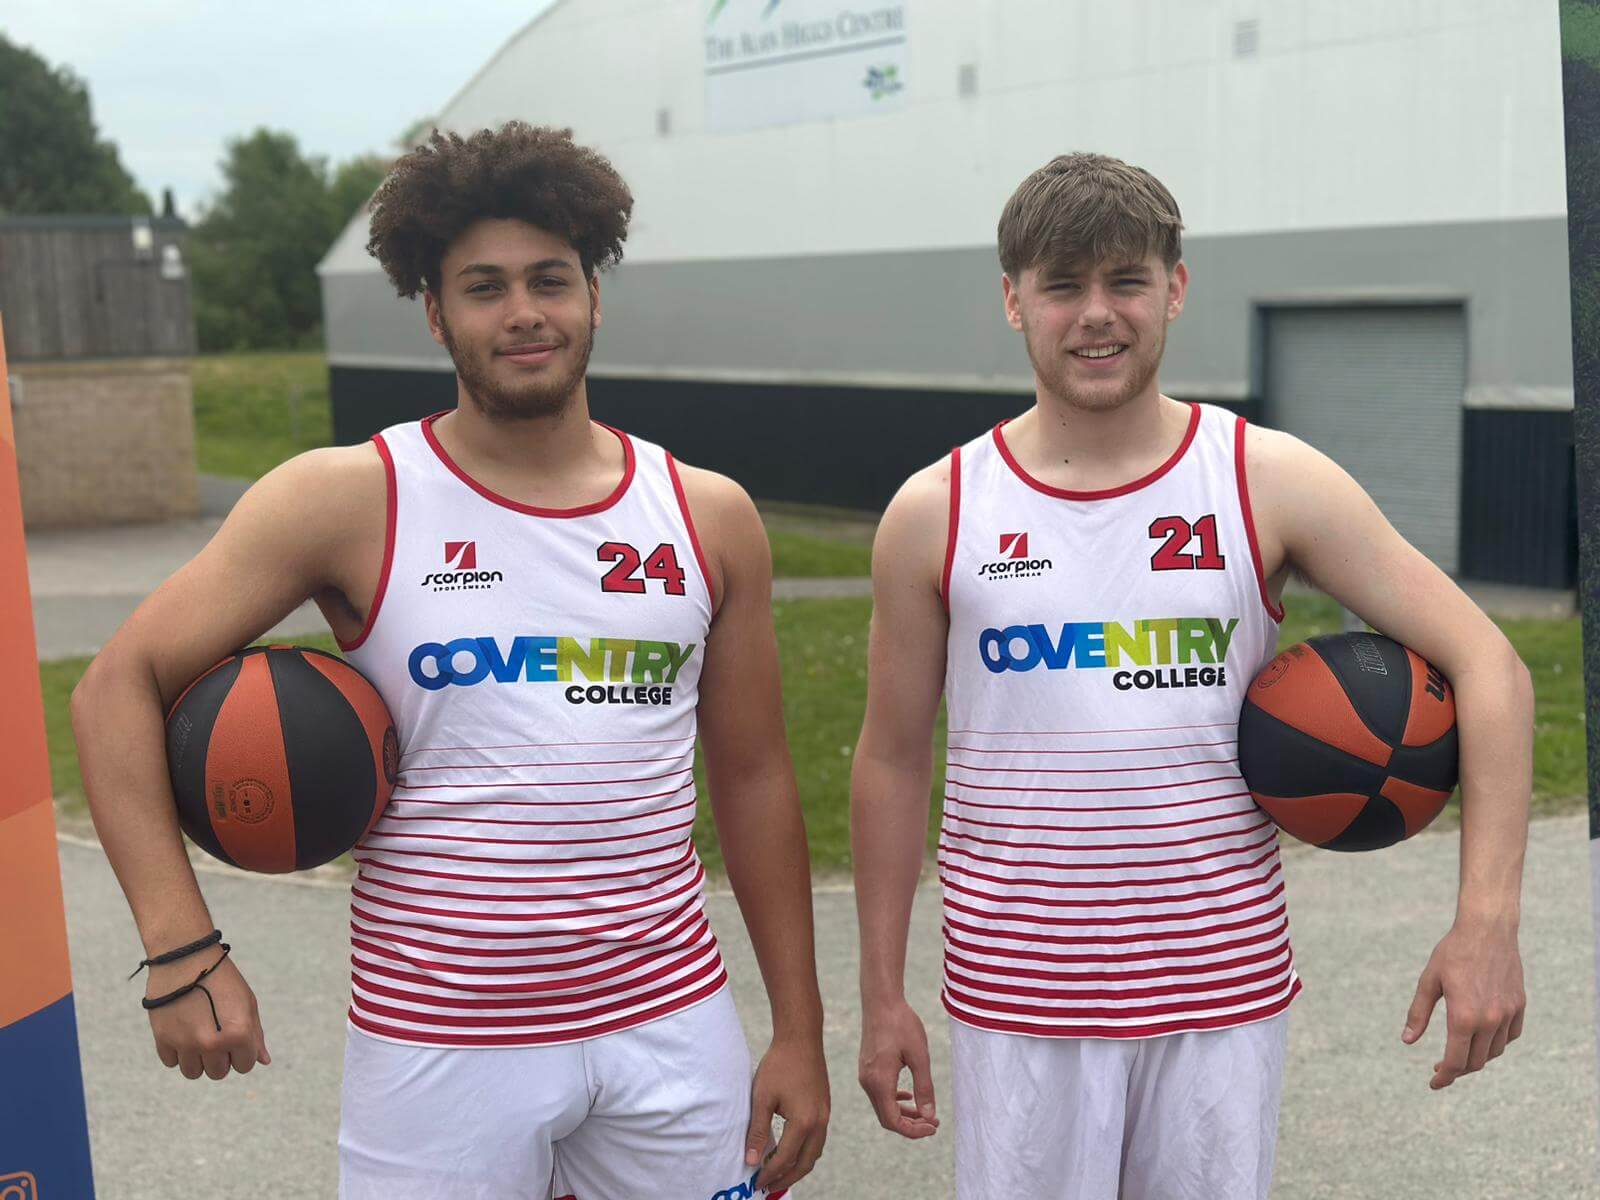 Coventry college basketball students holding basketball